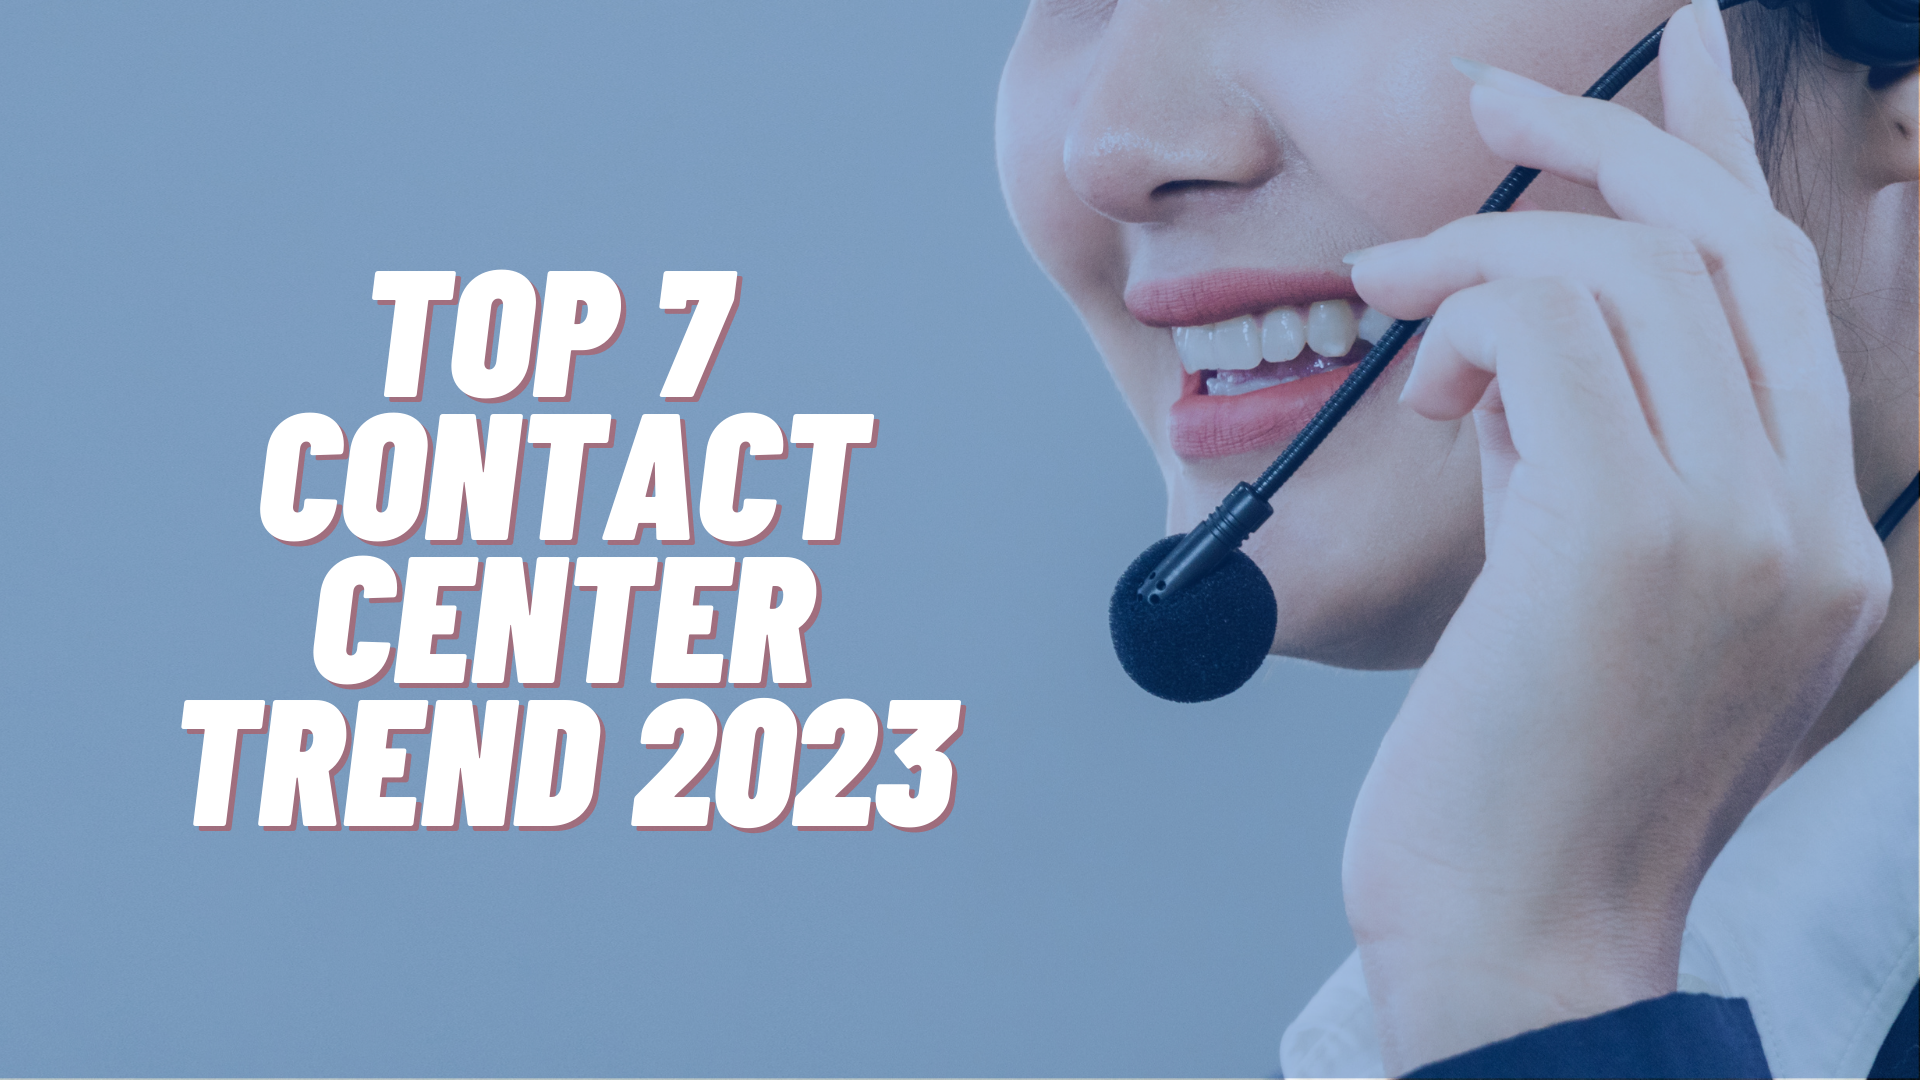 Image of Top 7 Contact Center Trends 2023 to Optimize Your Business